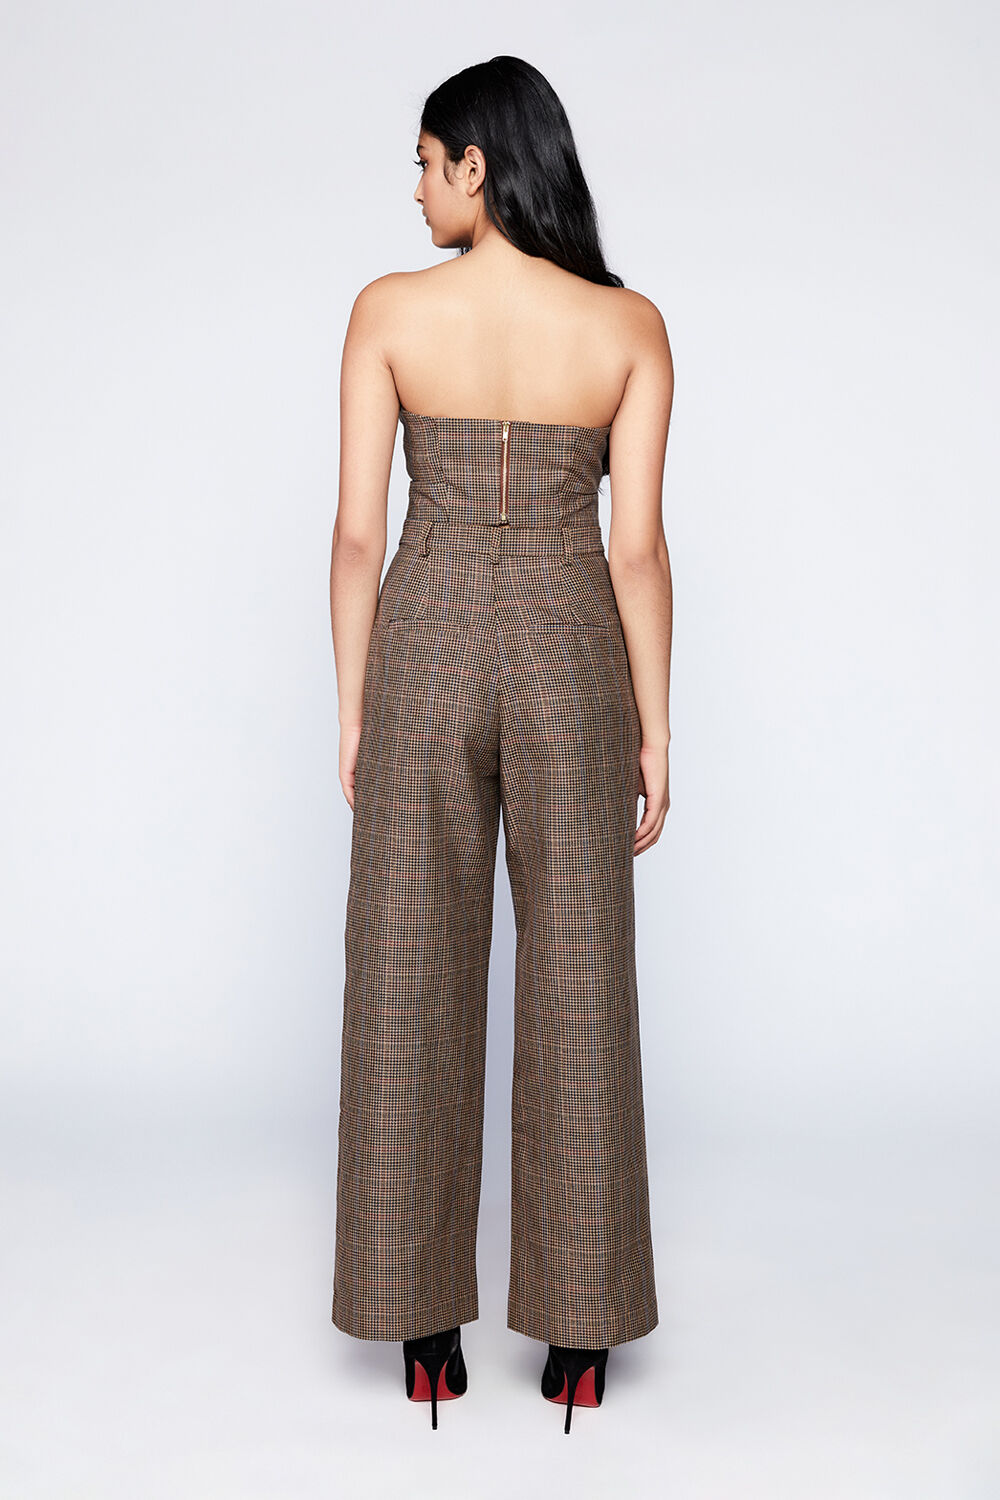 CHECK TUCK PANT in colour TOBACCO BROWN